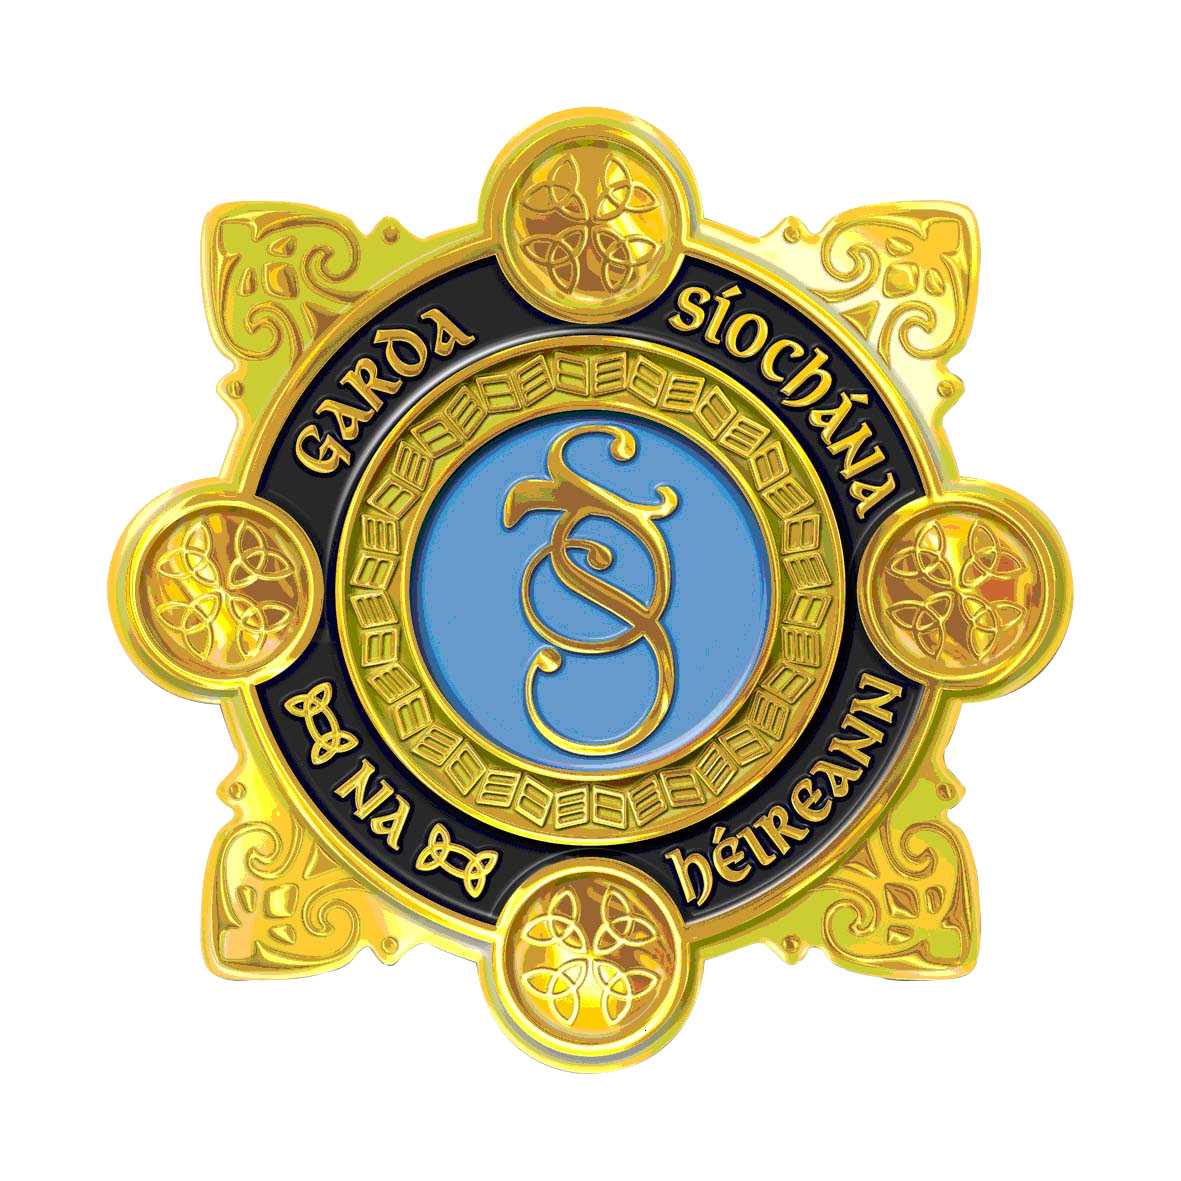 /garda/en/about-us/our-departments/office-of-corporate-communications/news-media/garda_crest-copy.jpg